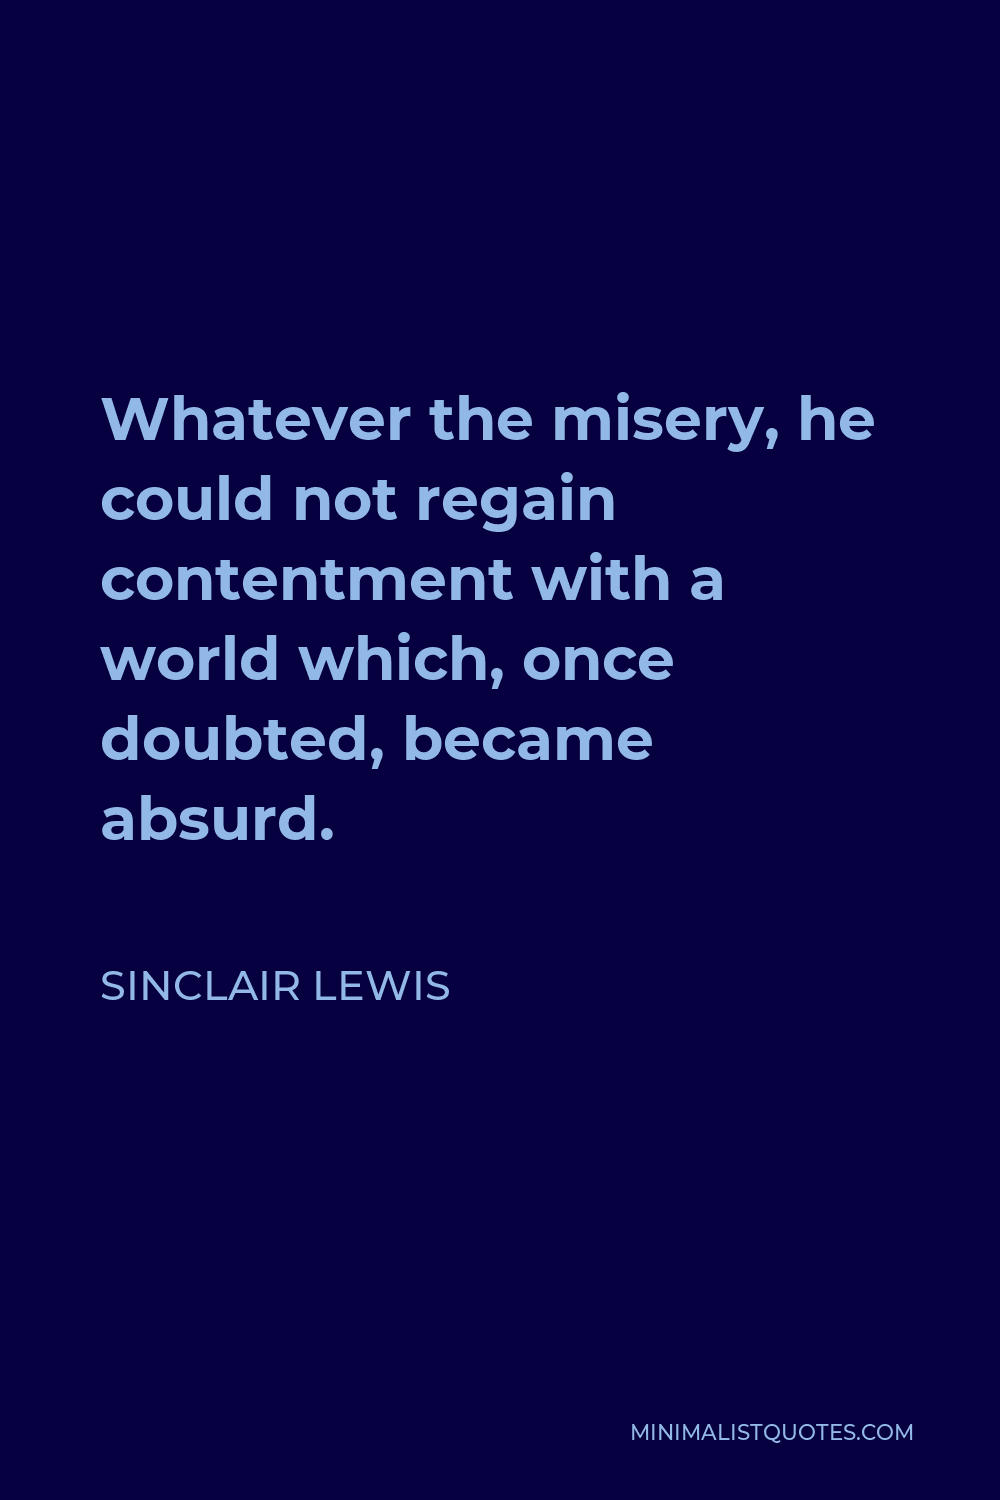 Sinclair Lewis Quote - Whatever the misery, he could not regain contentment with a world which, once doubted, became absurd.